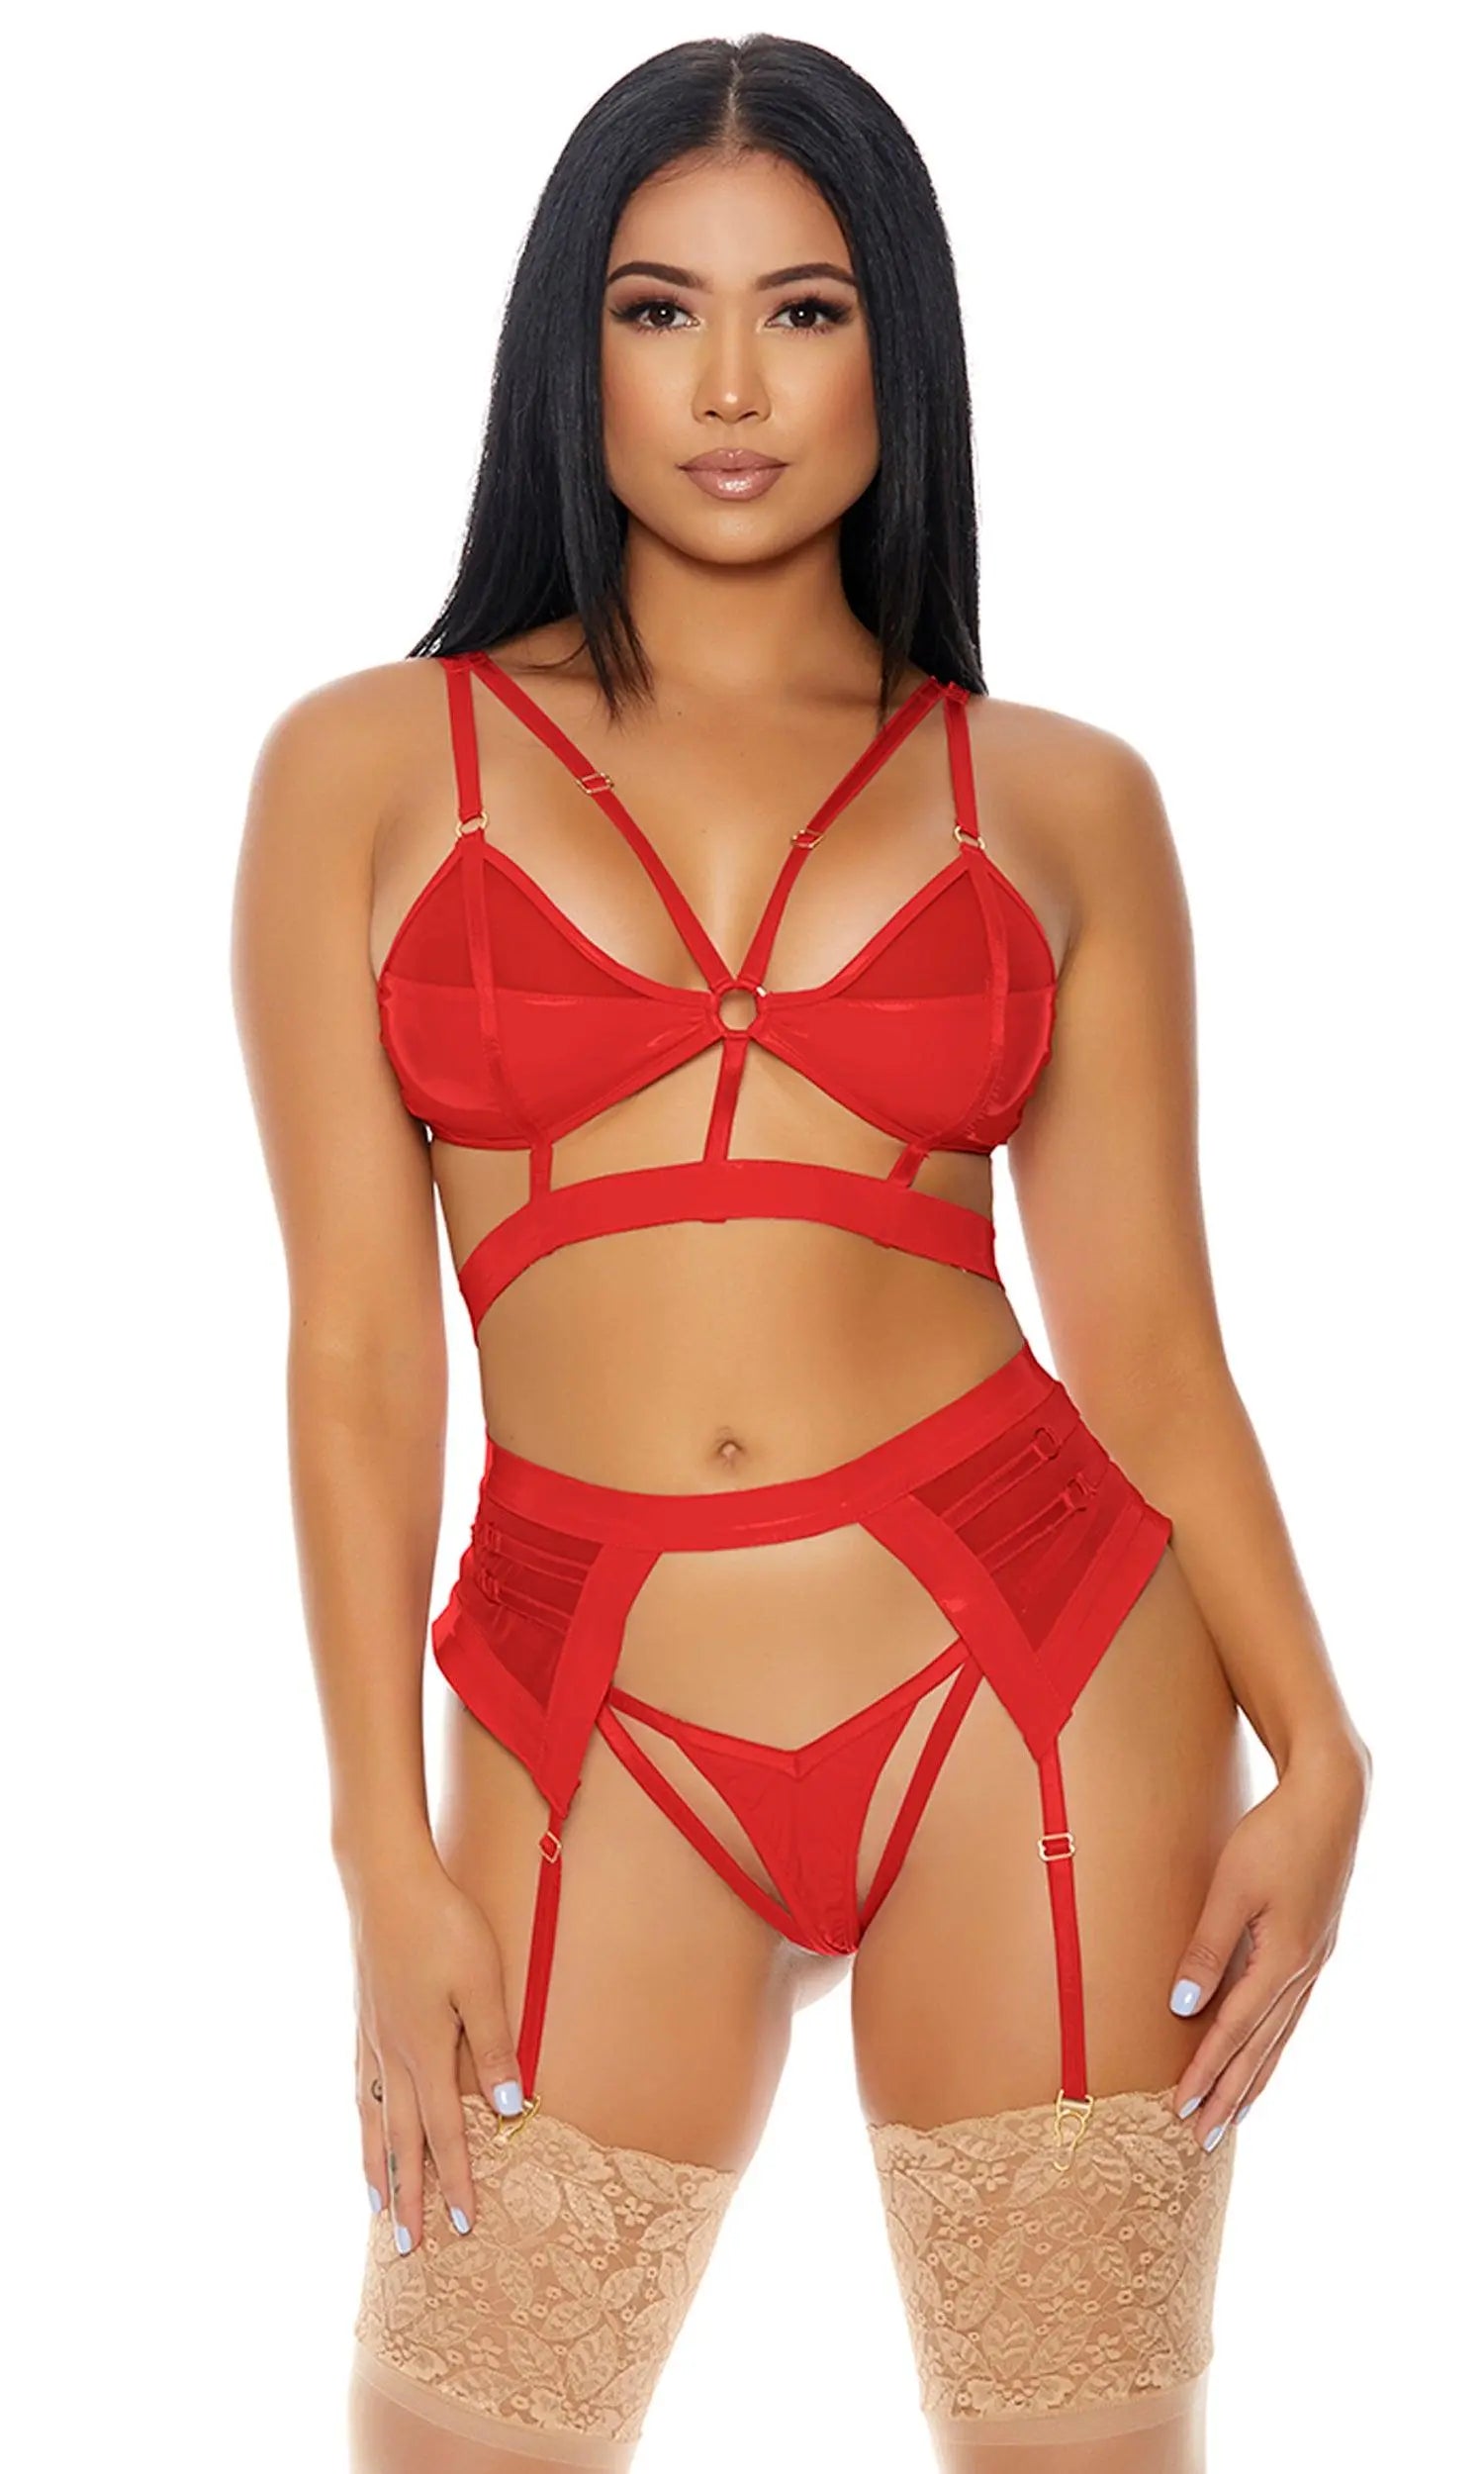 Double Cuff Love Lingerie Set - Sophisticated Stature